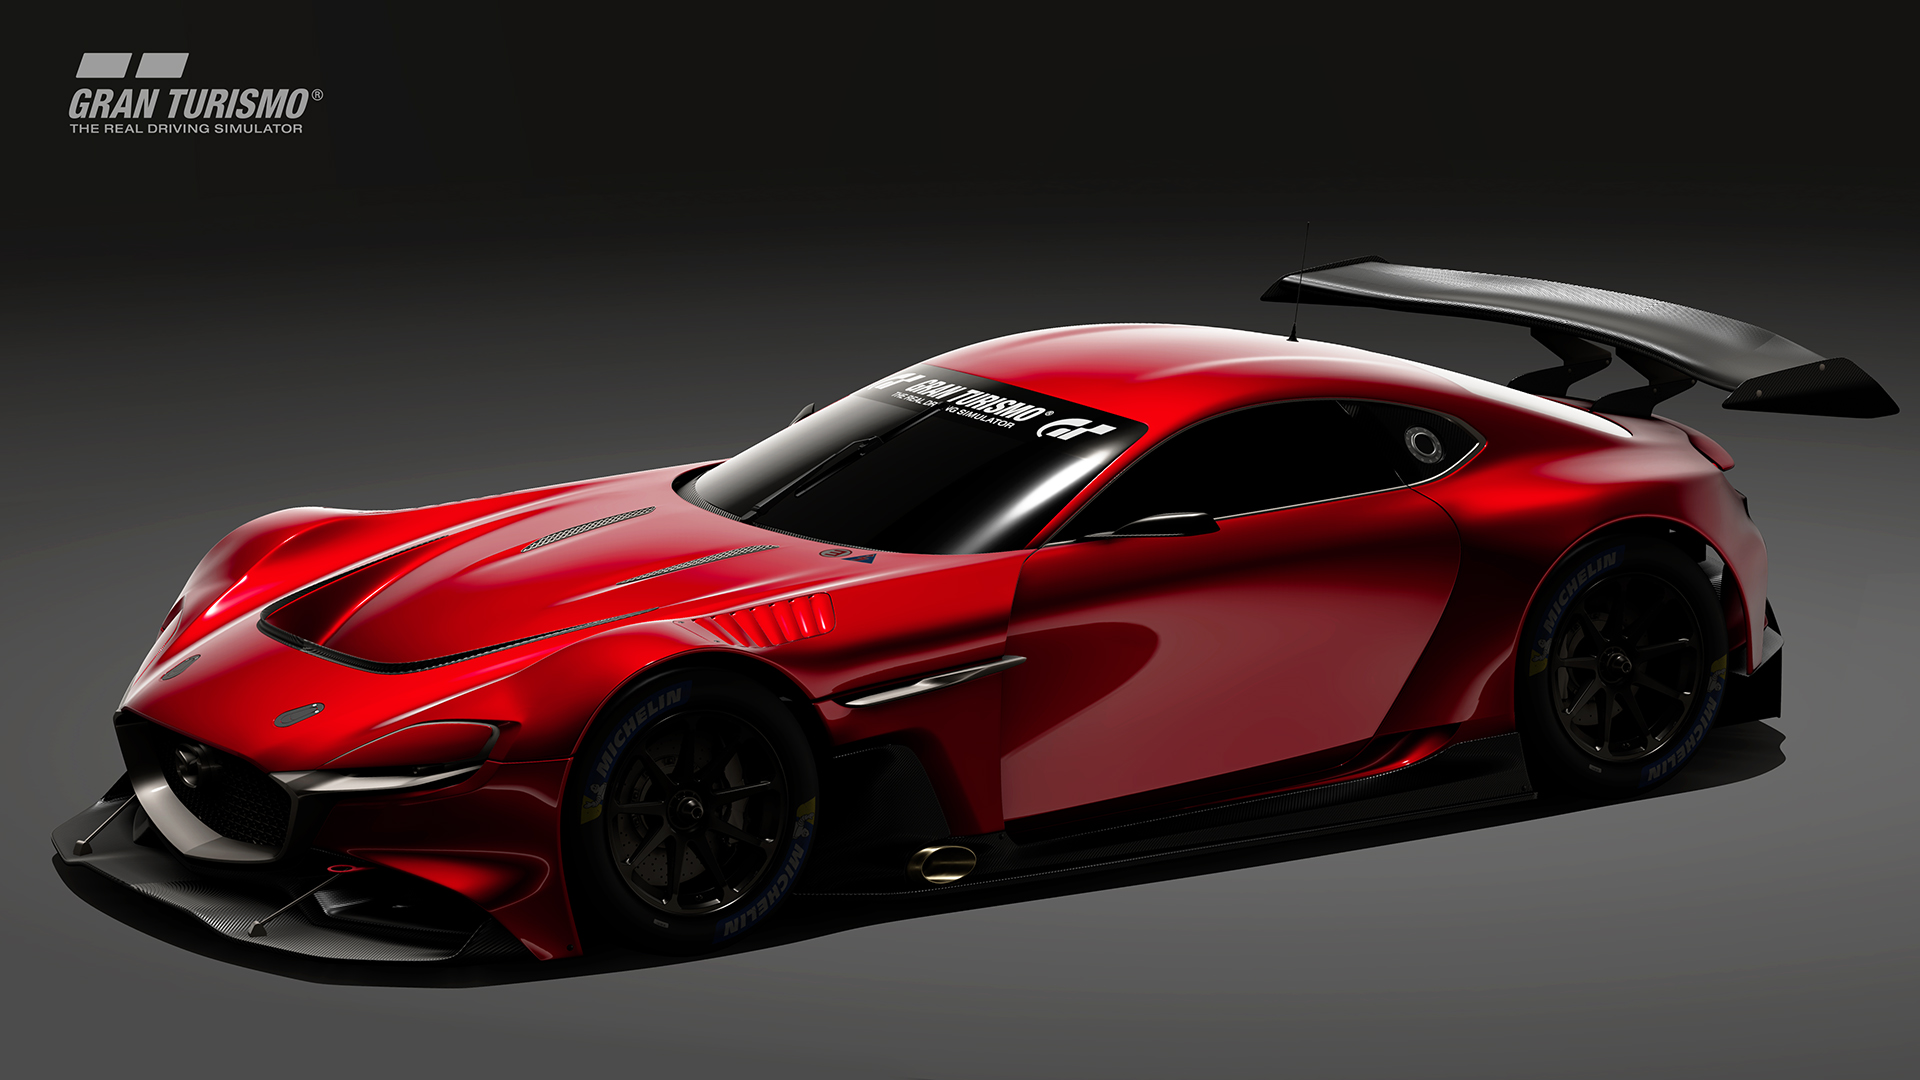 Introducing The Rx Vision Gt3 Concept From Mazda Now An Official Partner Of The Fia Gt Championships News Gran Turismo Com